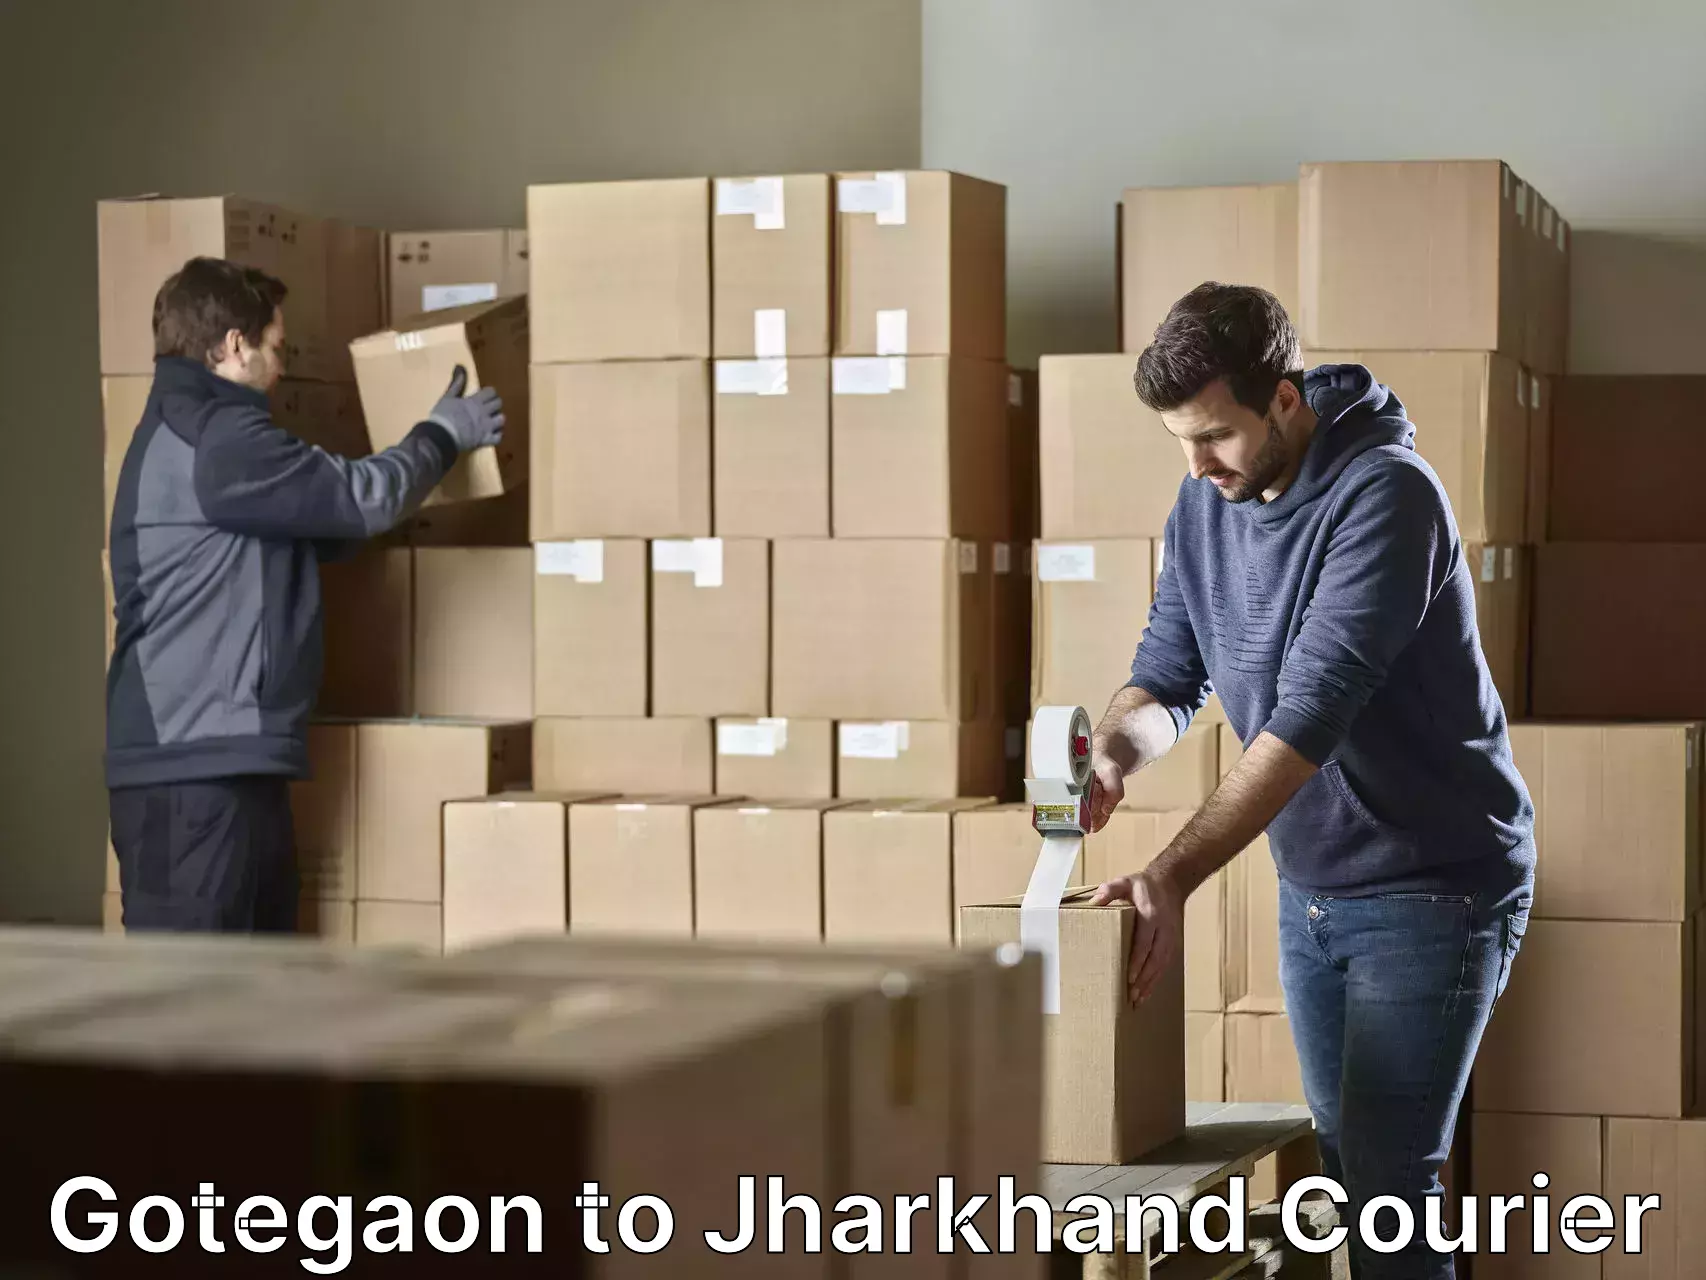 Furniture relocation experts Gotegaon to Jharkhand